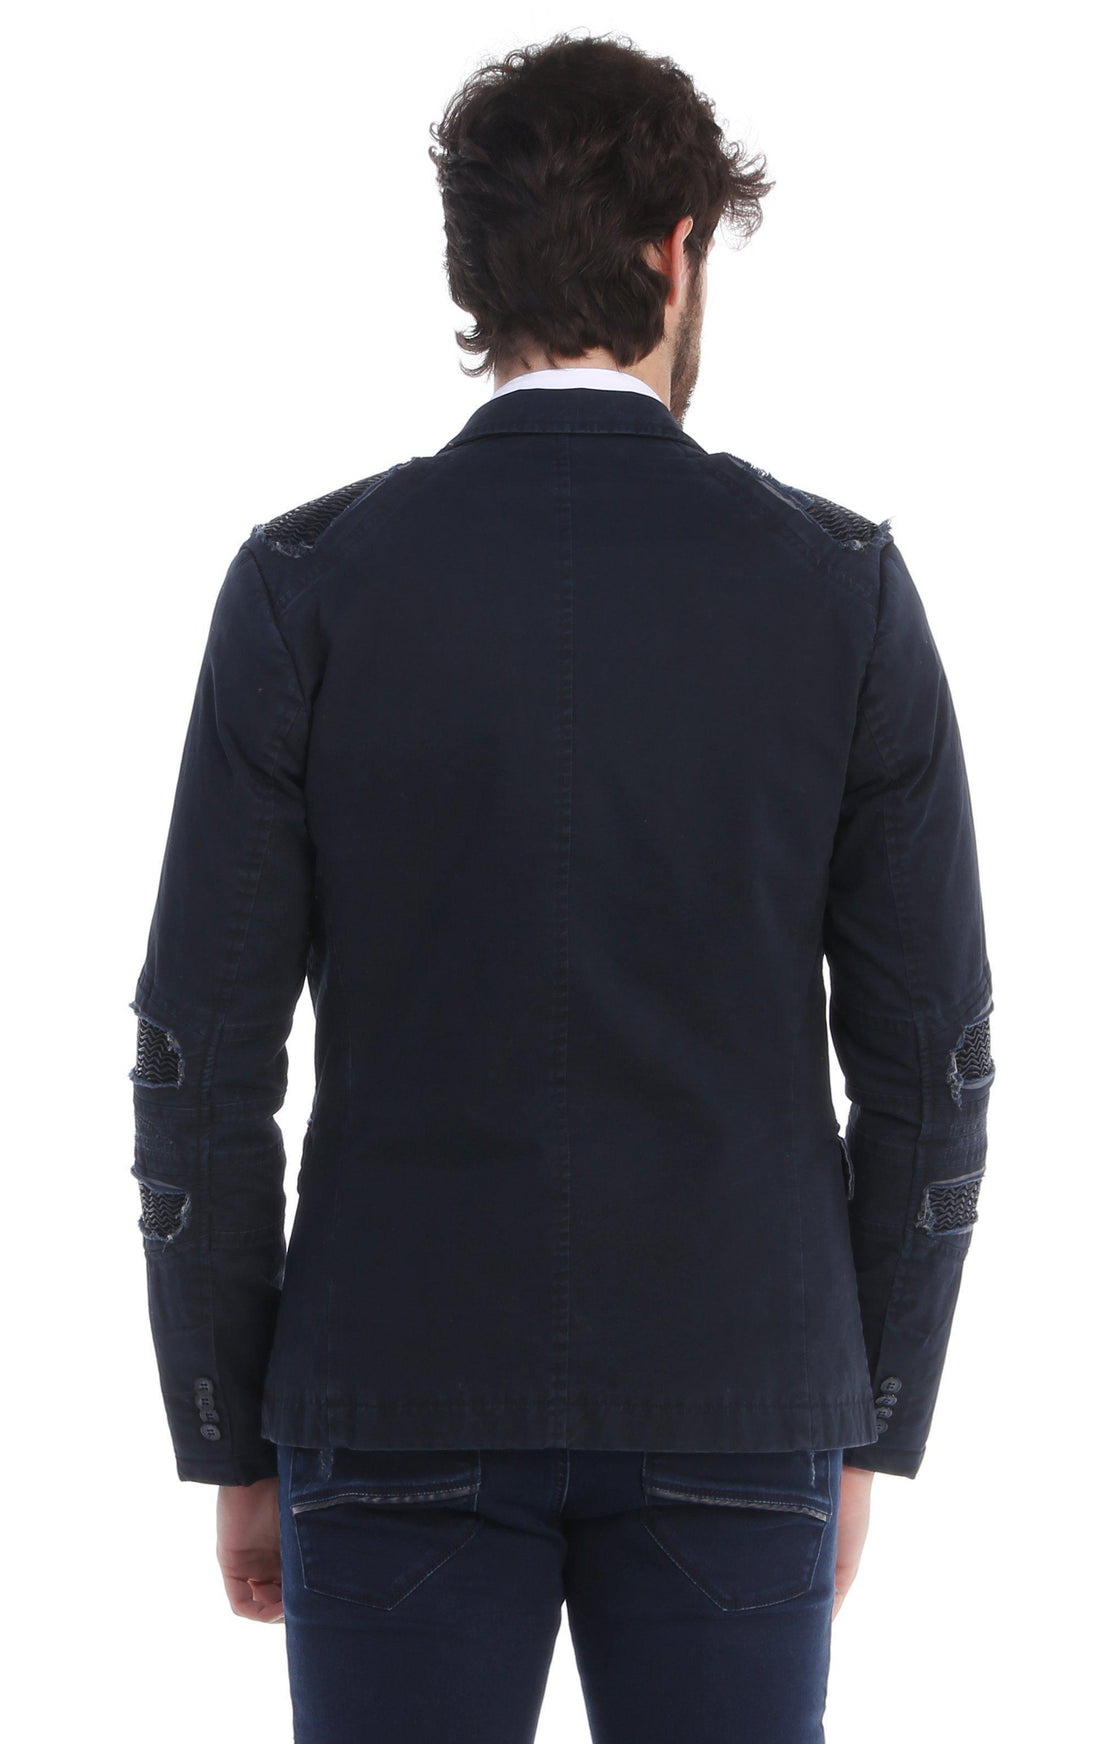 Ripped Patched Slim Fit Motorcycle Jacket - NAVY - Ron Tomson